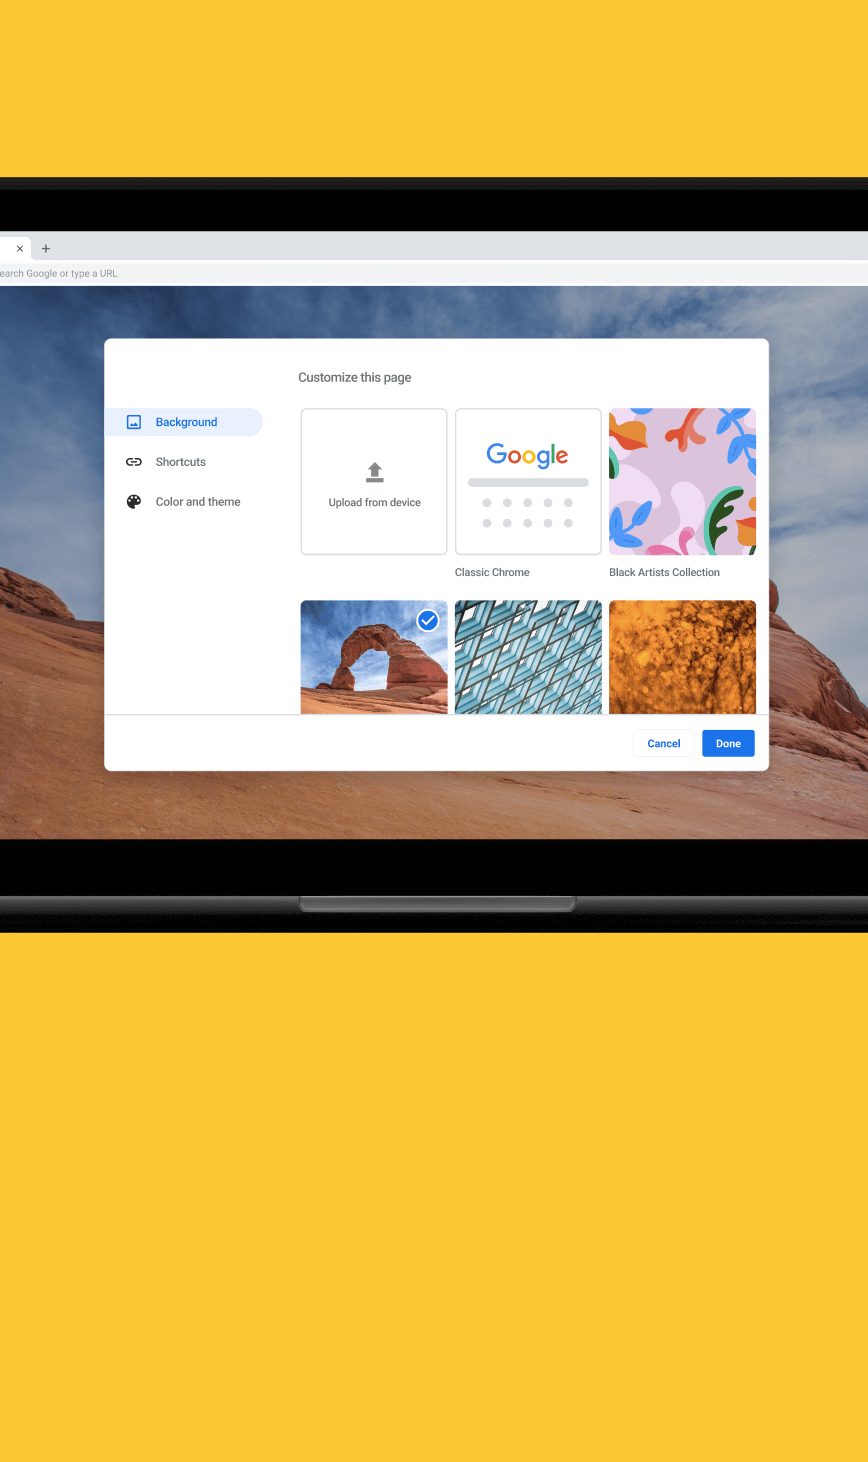 How to Customize Your Google Chrome Background & Theme